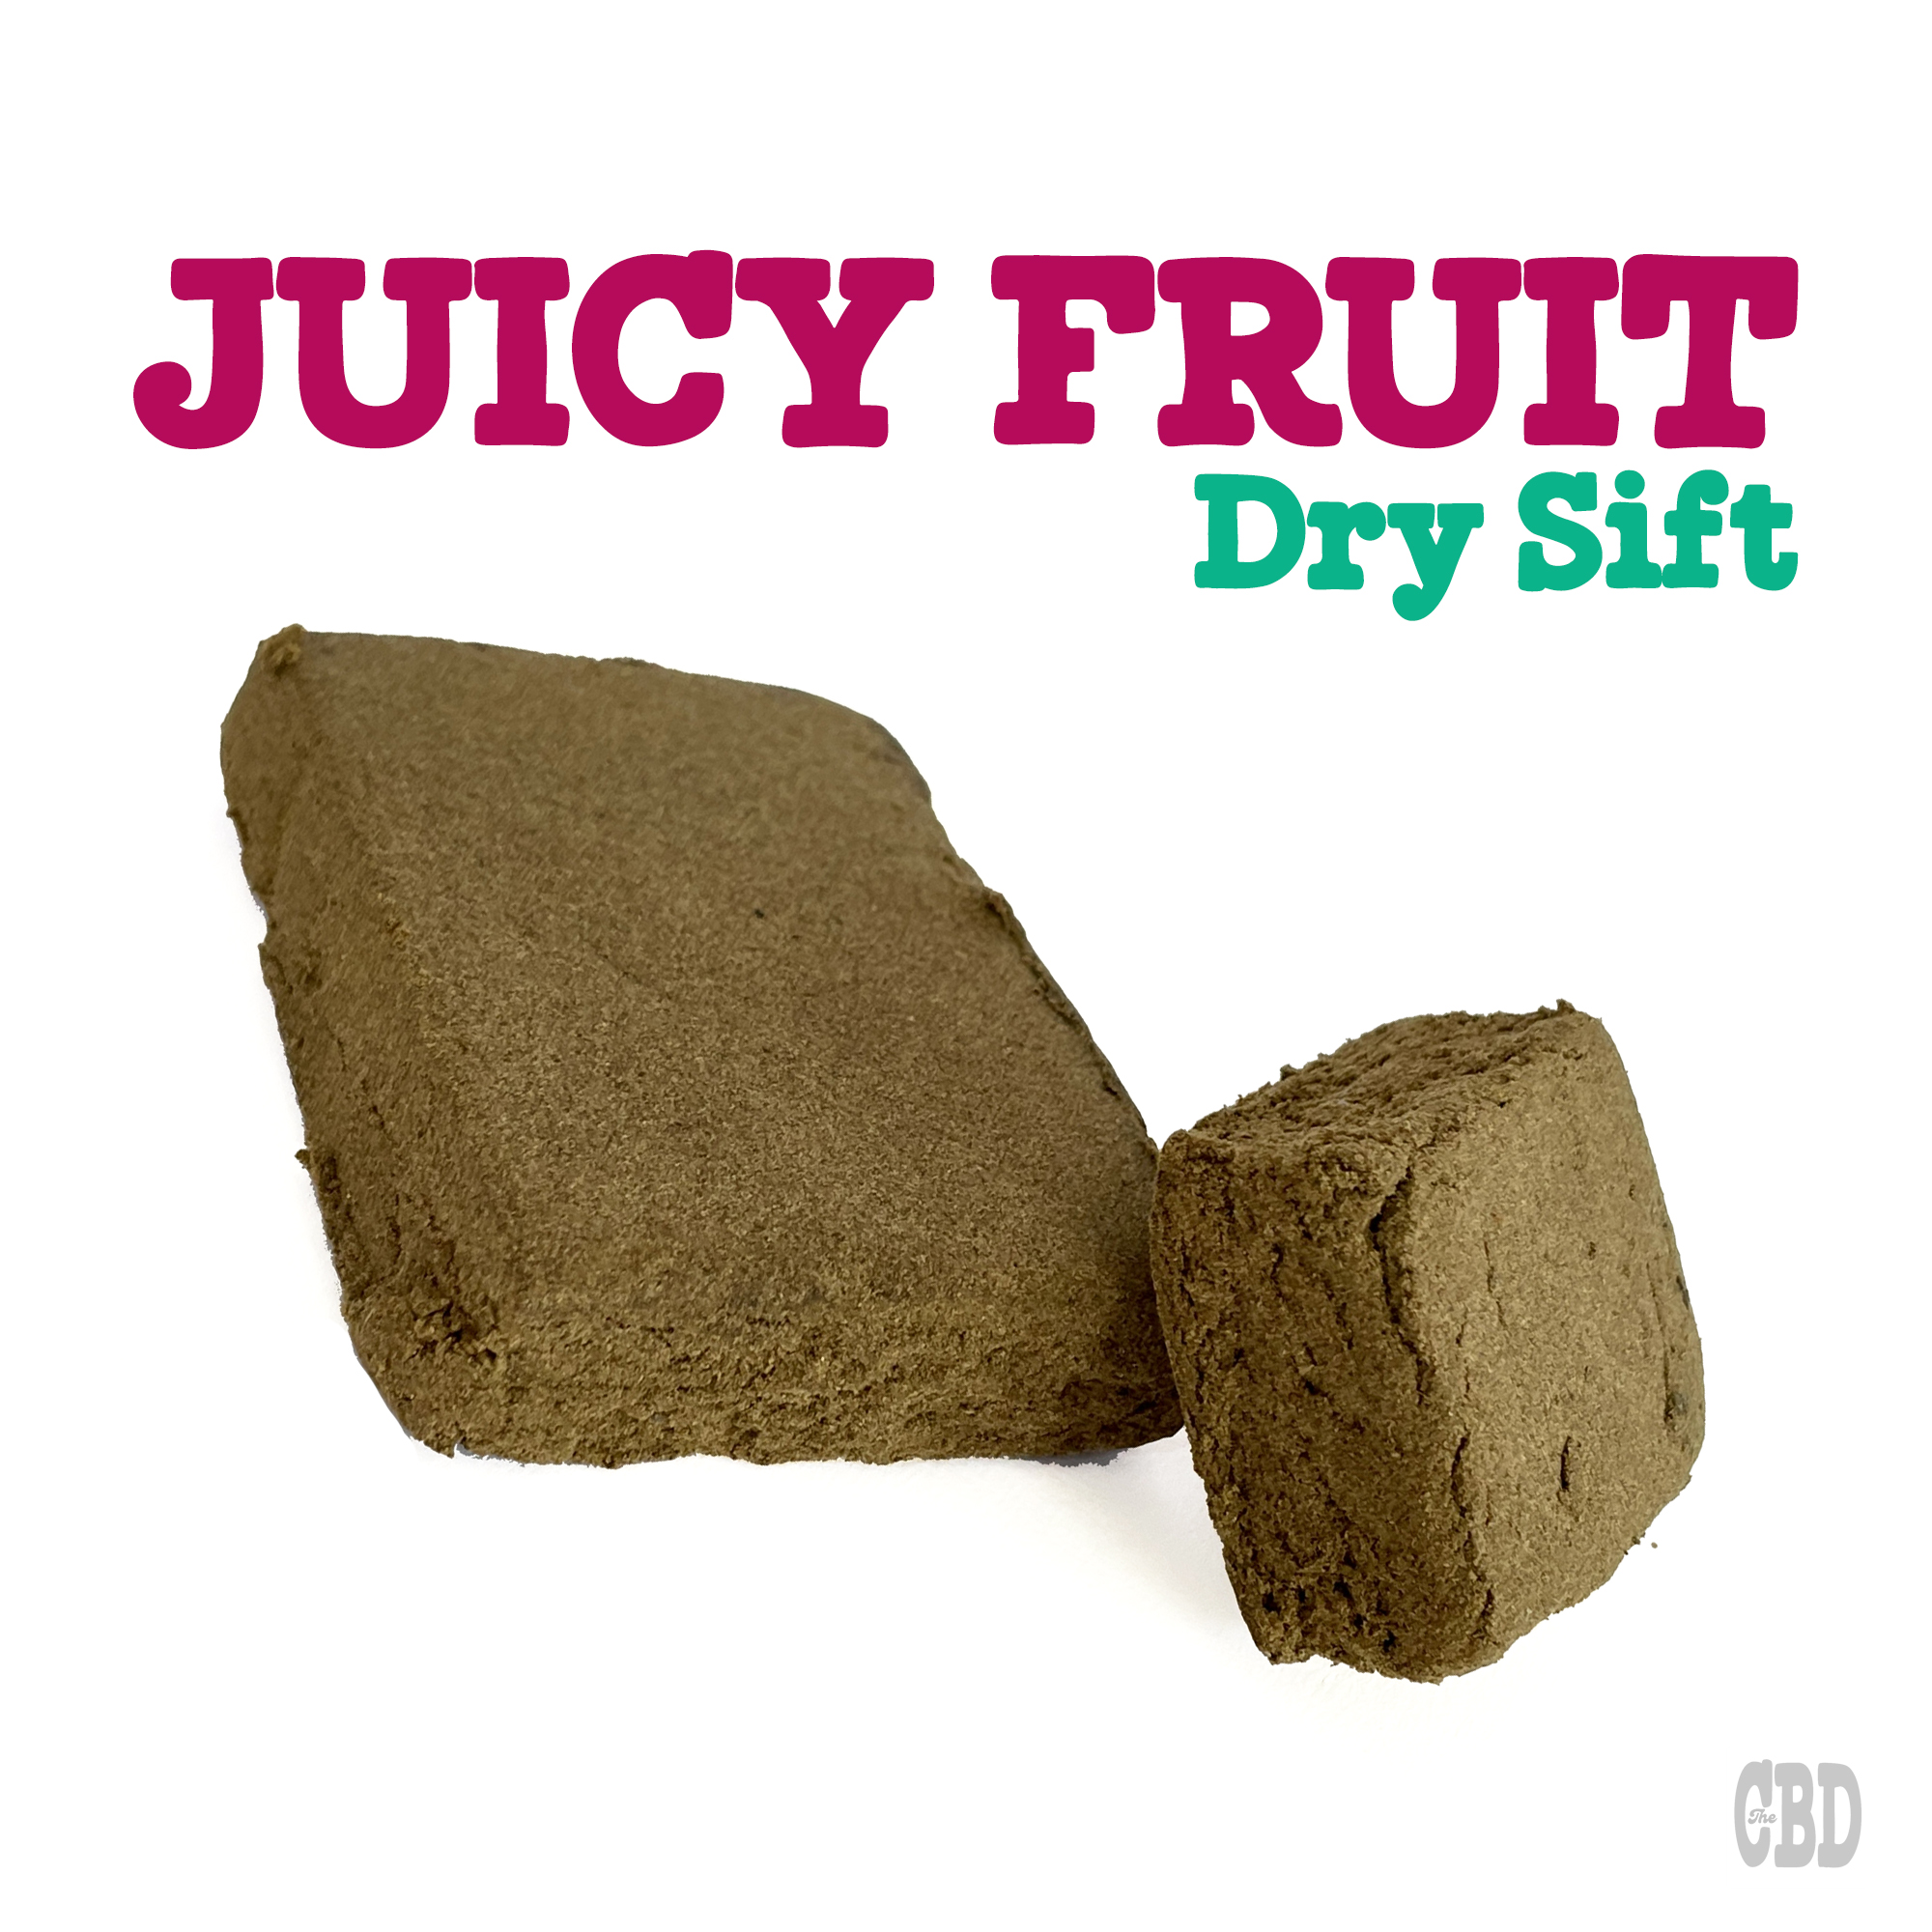 DRY JUICY FRUIT CBD by Thecbdstore